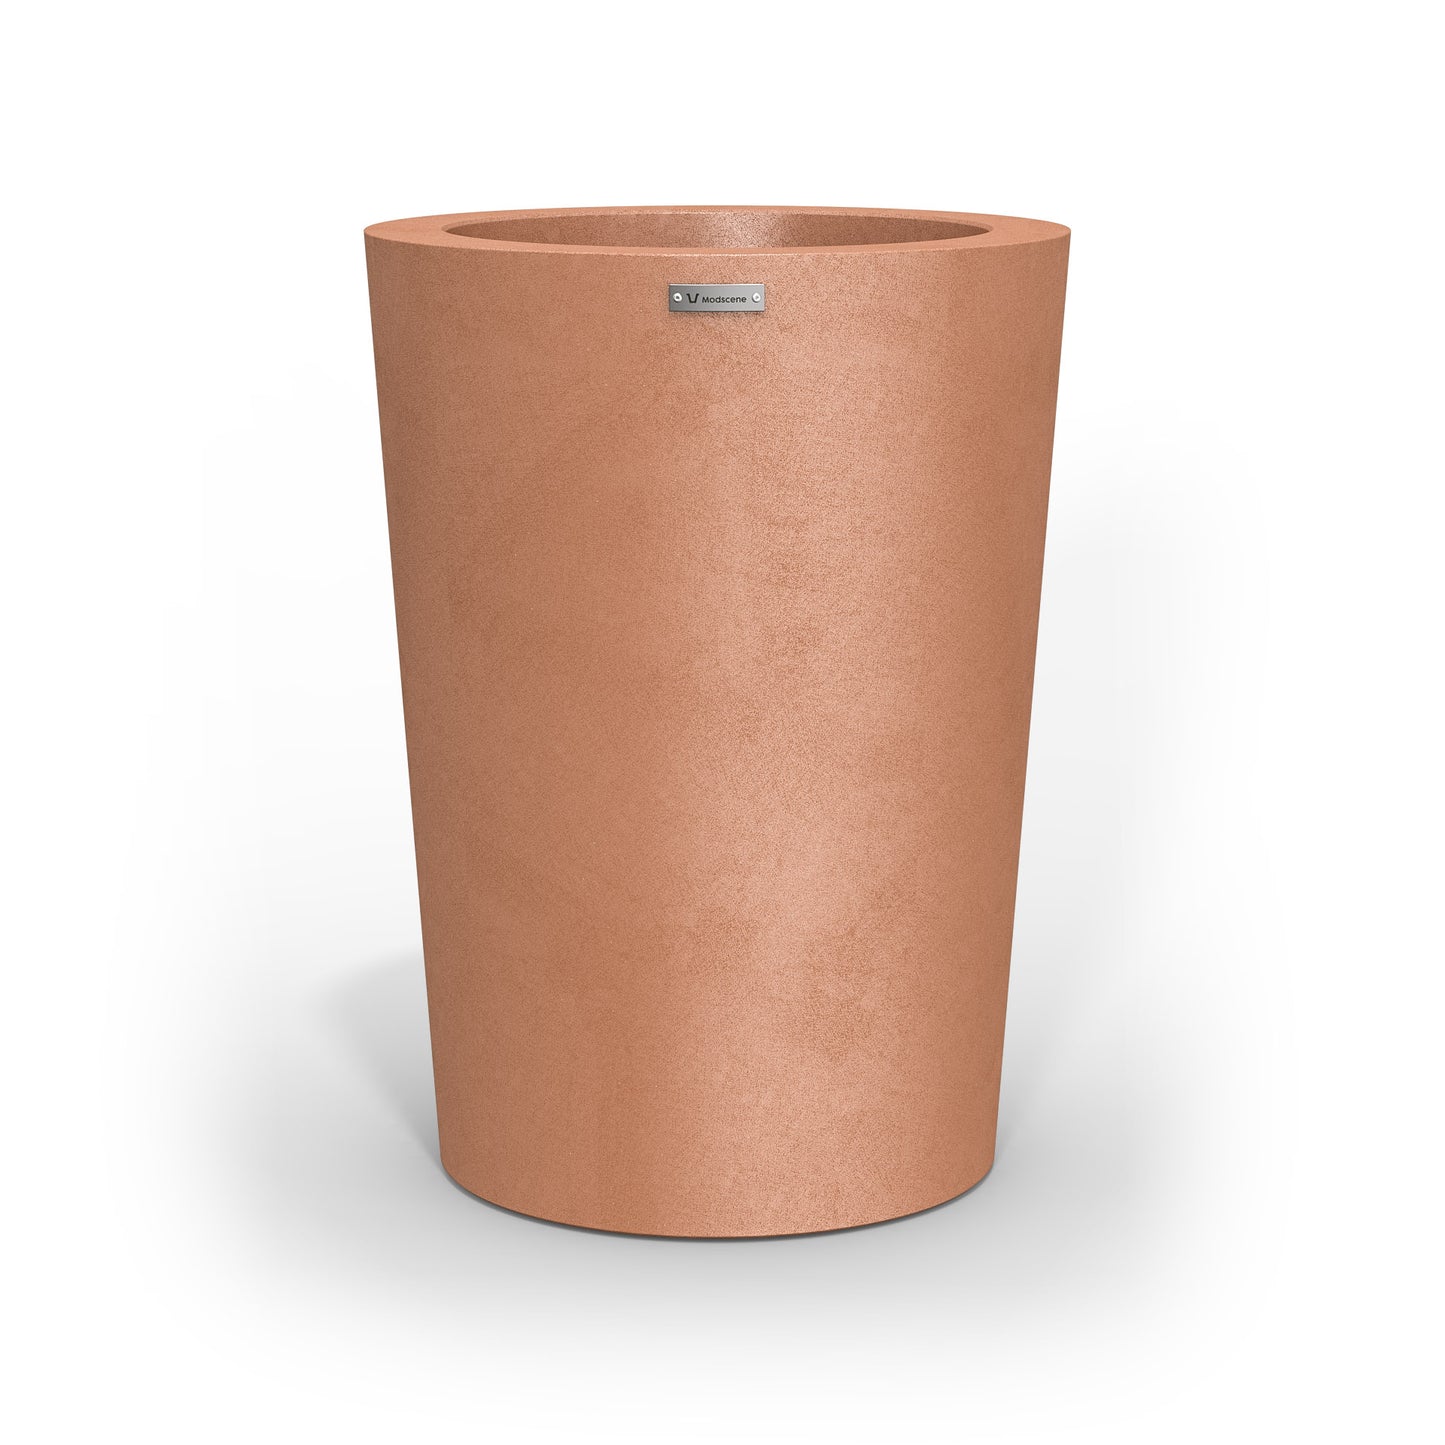 A modern style planter pot in a terracotta colour. Made in NZ.